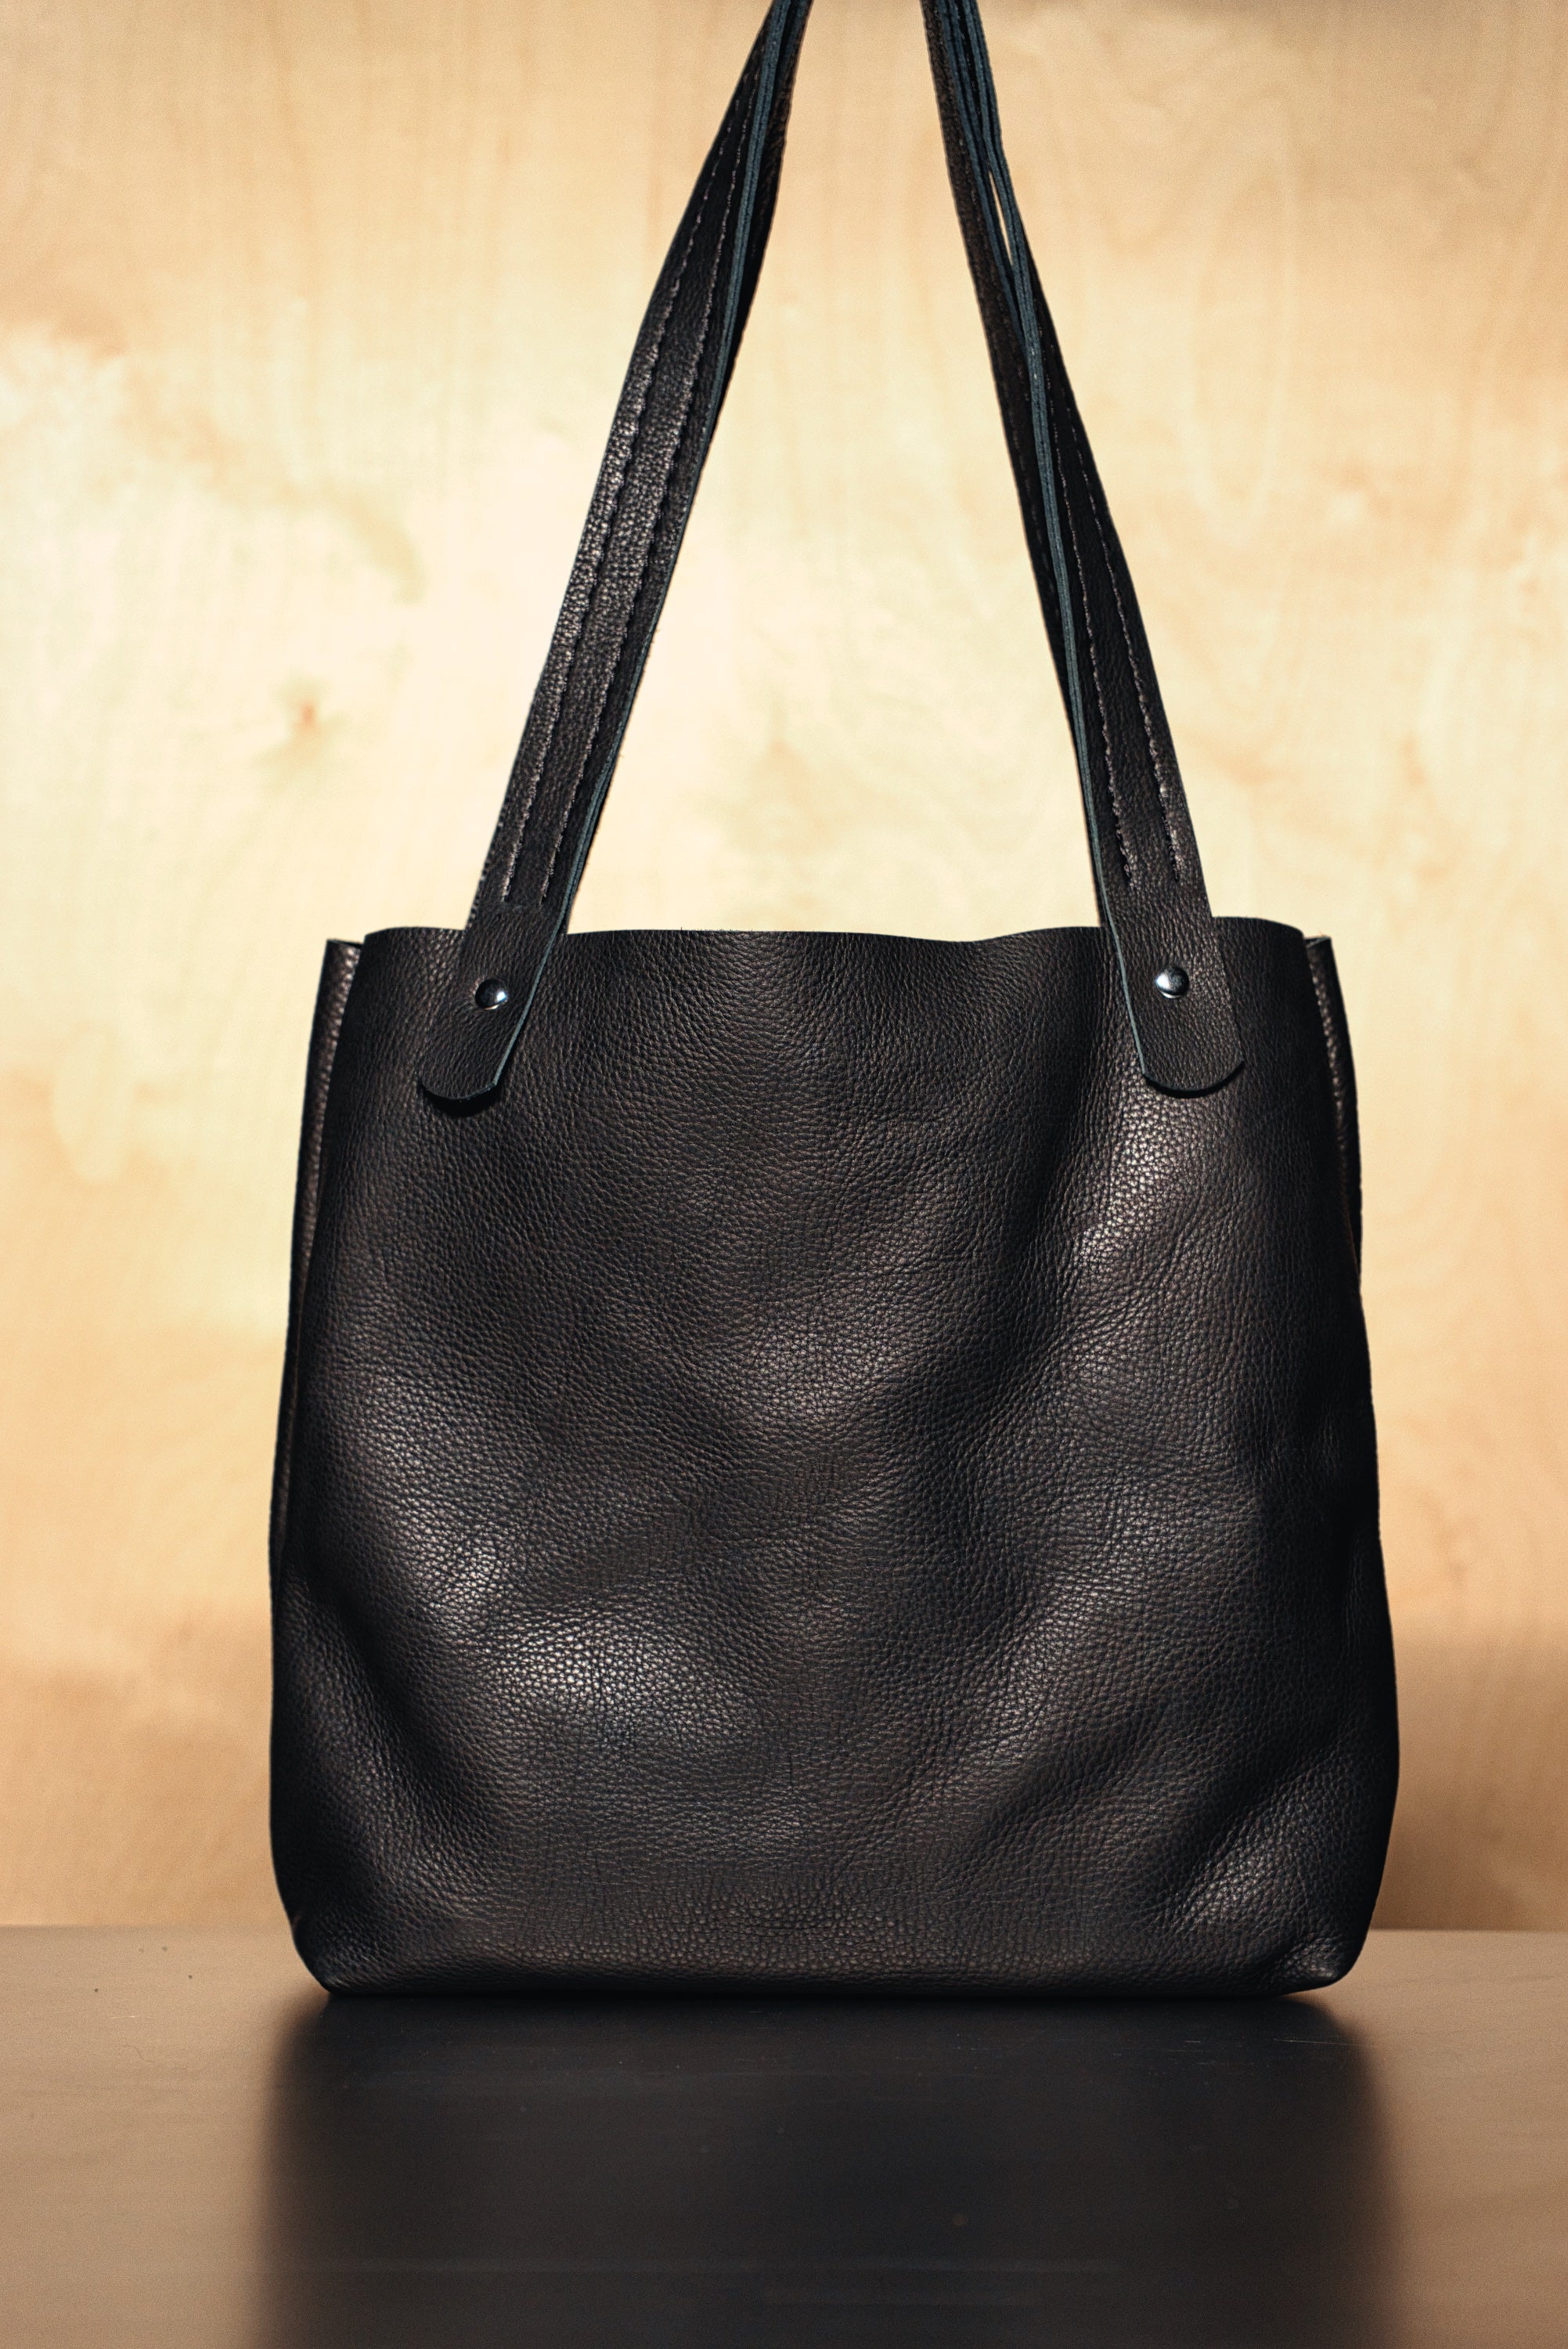 Black Leather Hobo - Lost Generation Goods